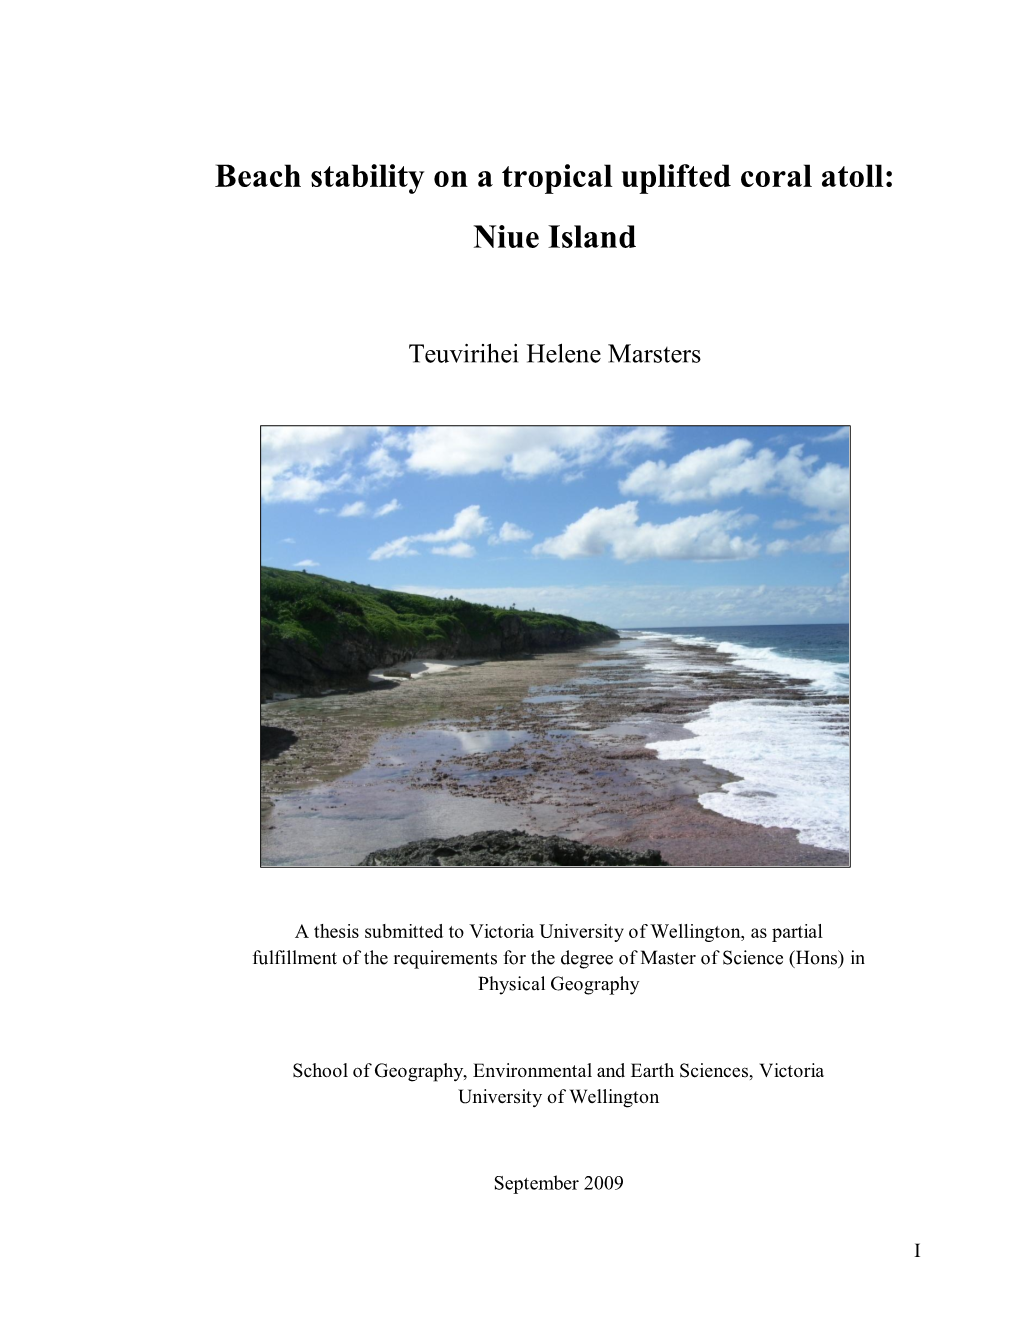 Beach Stability on a Tropical Uplifted Coral Atoll: Niue Island